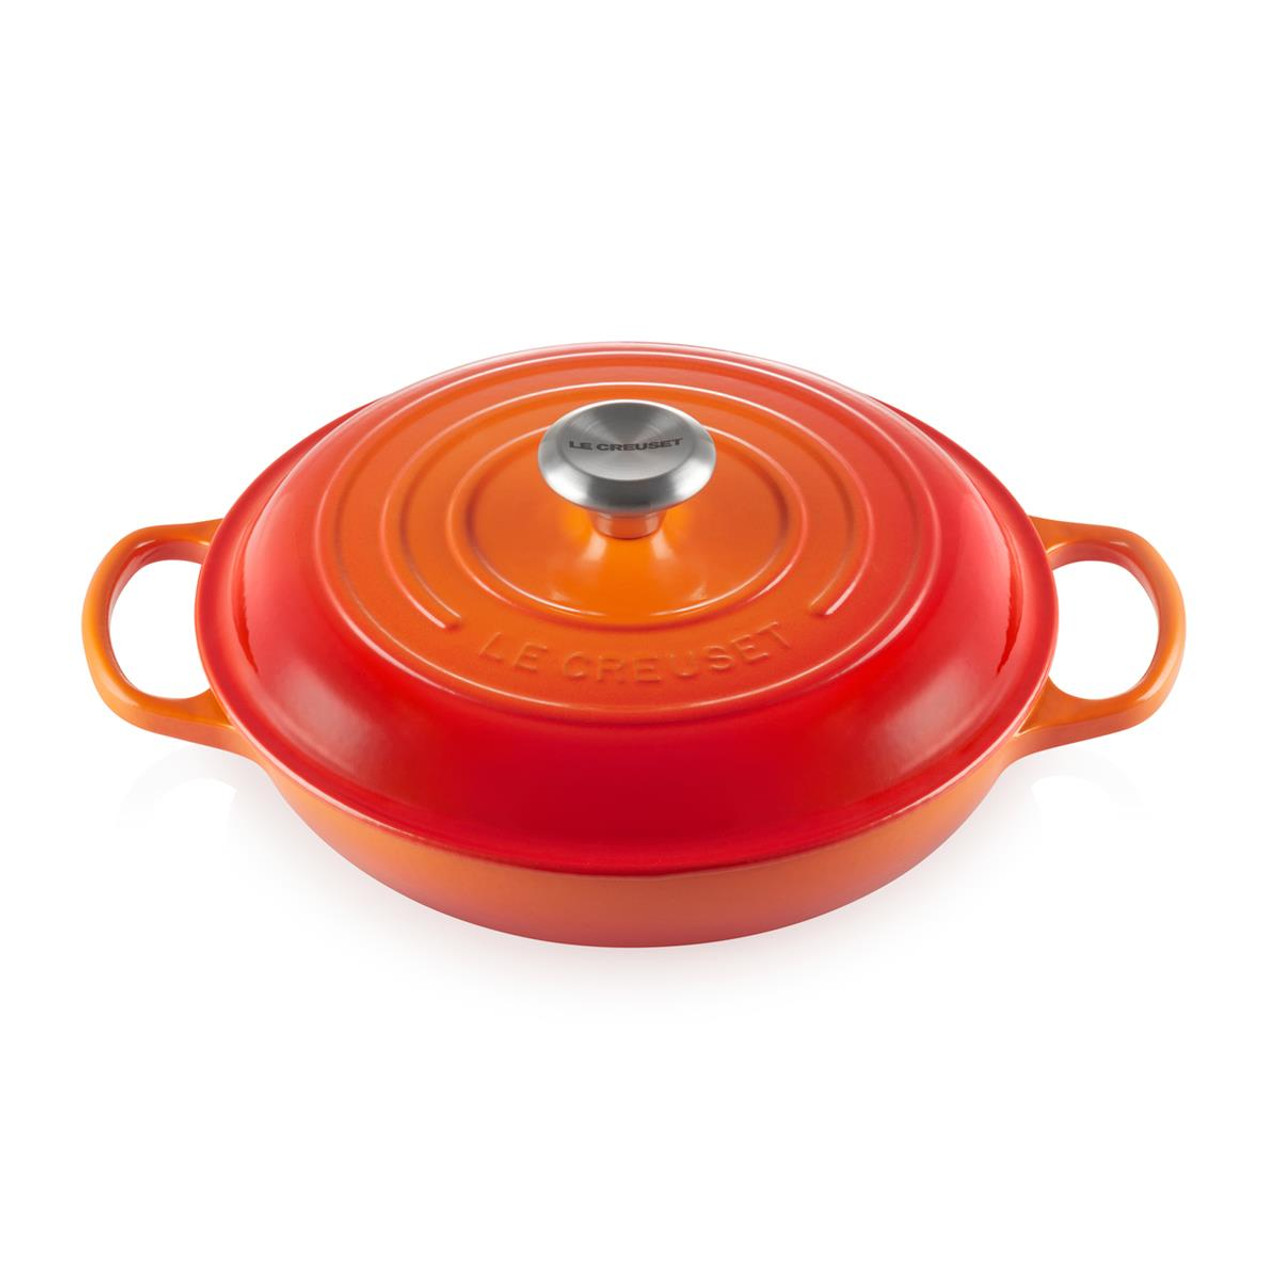 What is the diameter of the Le Creuset 26cm cast iron casserole dish?